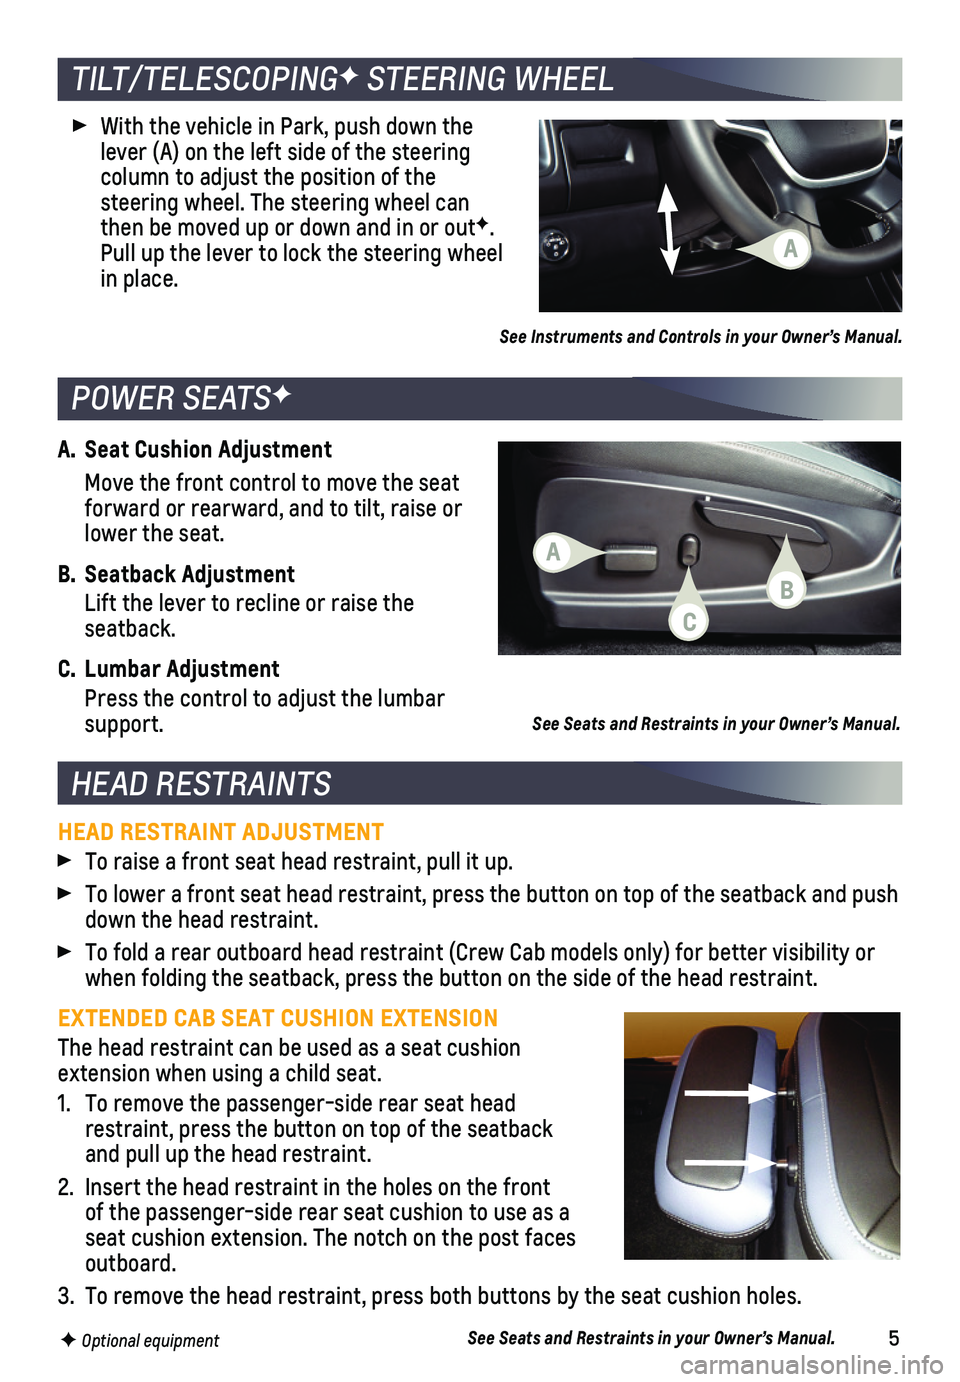 CHEVROLET COLORADO 2021  Get To Know Guide 5
A. Seat Cushion Adjustment
 Move the front control to move the seat forward or rearward, and to tilt, raise or lower the seat.
B. Seatback Adjustment
 Lift the lever to recline or raise the  seatbac